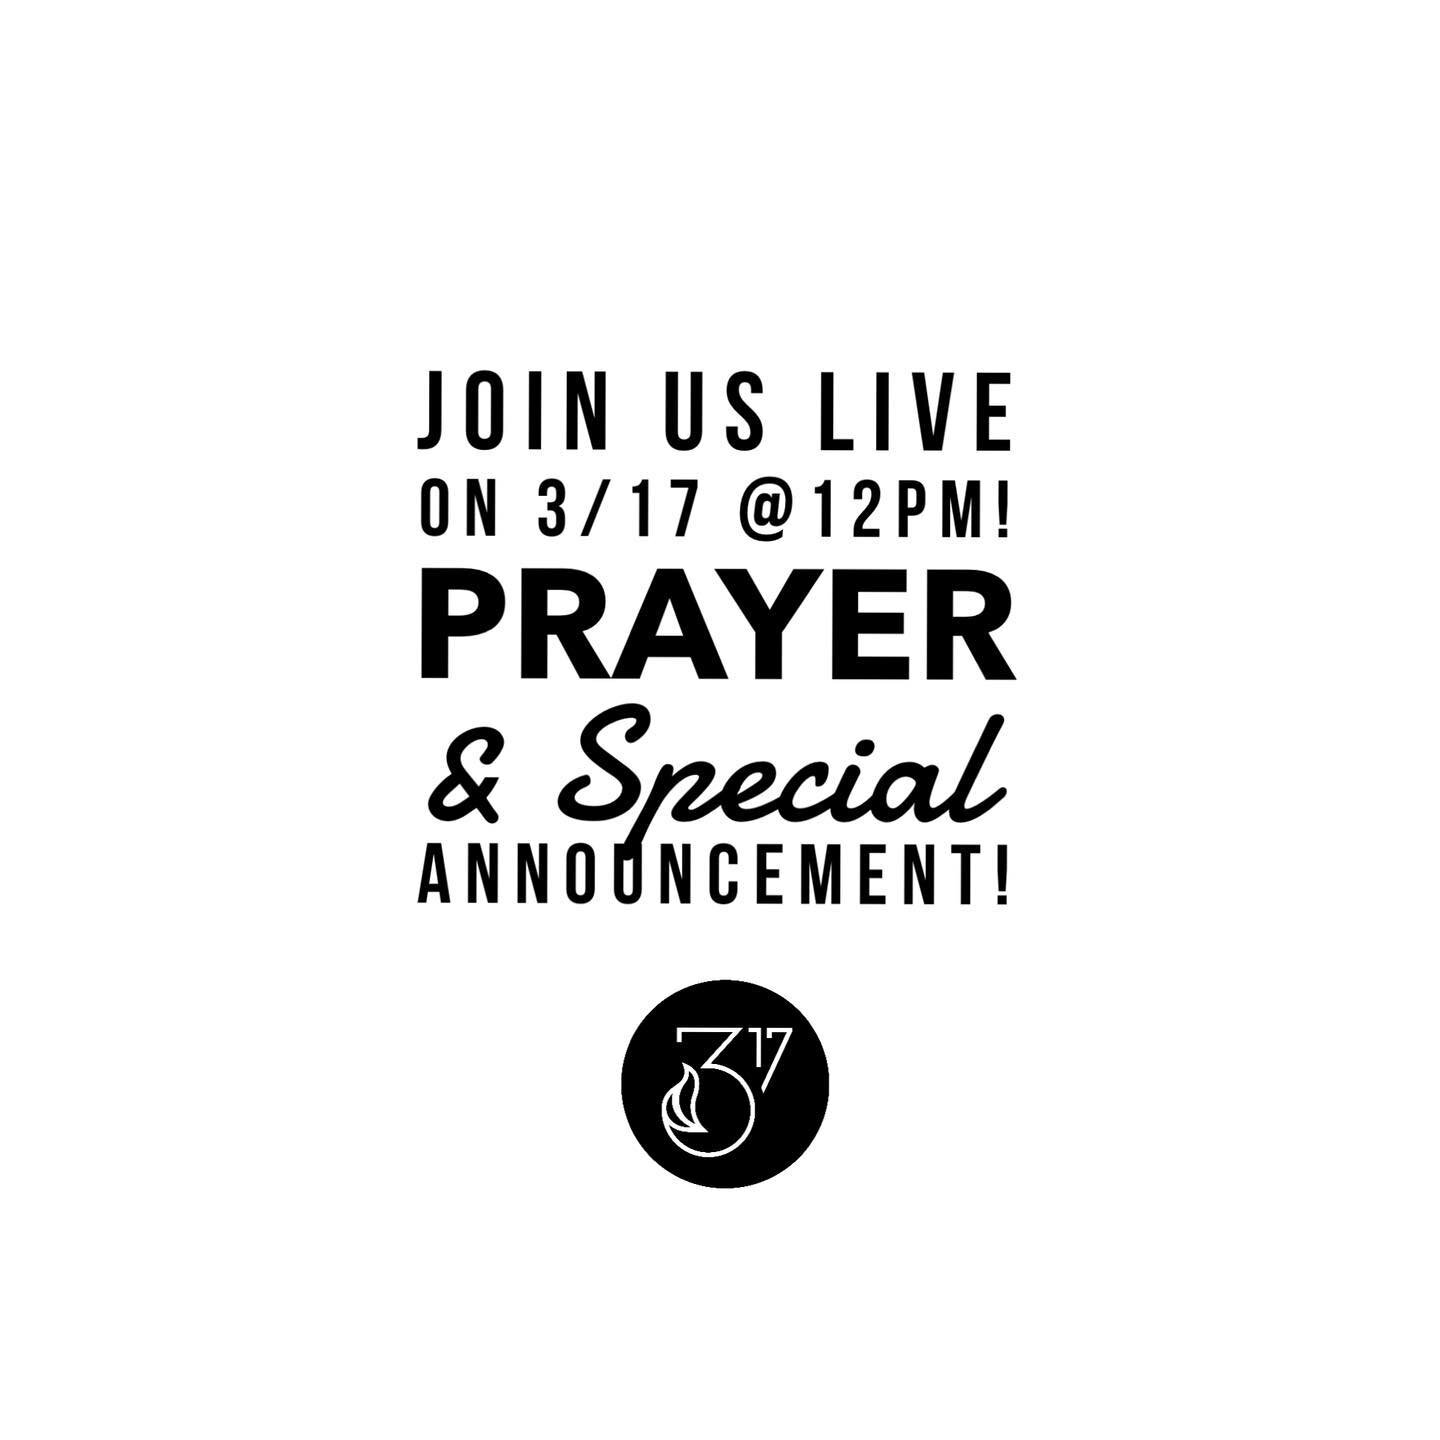 3/17- Thursday at Noon! Save the date/time!Join us LIVE for Prayer &amp; 📣Special Announcement on @317freedom Facebook Page! LINK IN BIO
.
You can post your name or prayer requests- our team prays over each one. See you there🤍- @christinelbaker
.
#